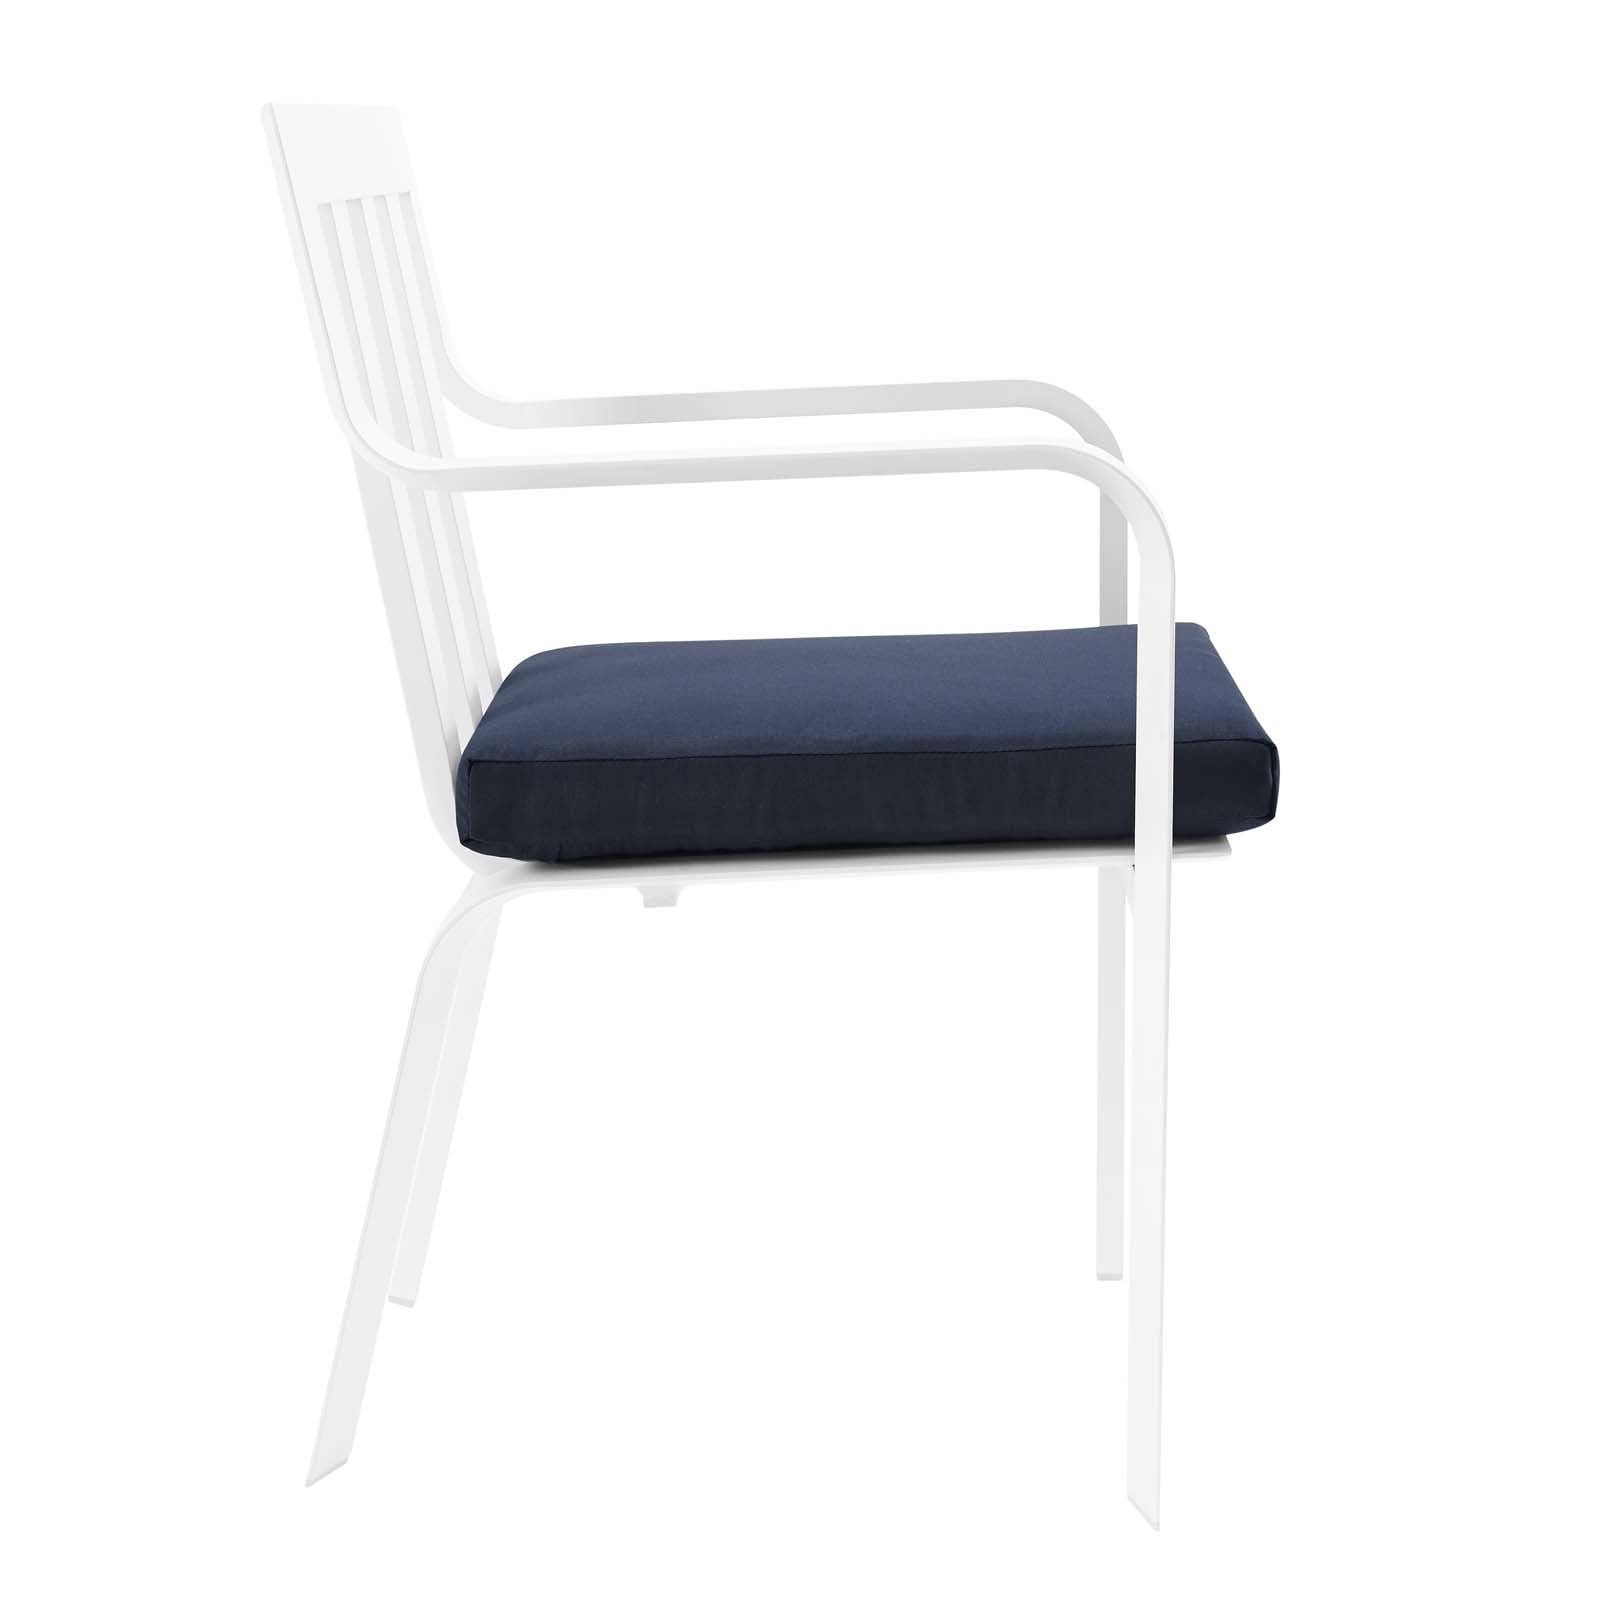 Modway Outdoor Conversation Sets - Baxley Outdoor Patio Aluminum Armchair Set of 2 White Navy